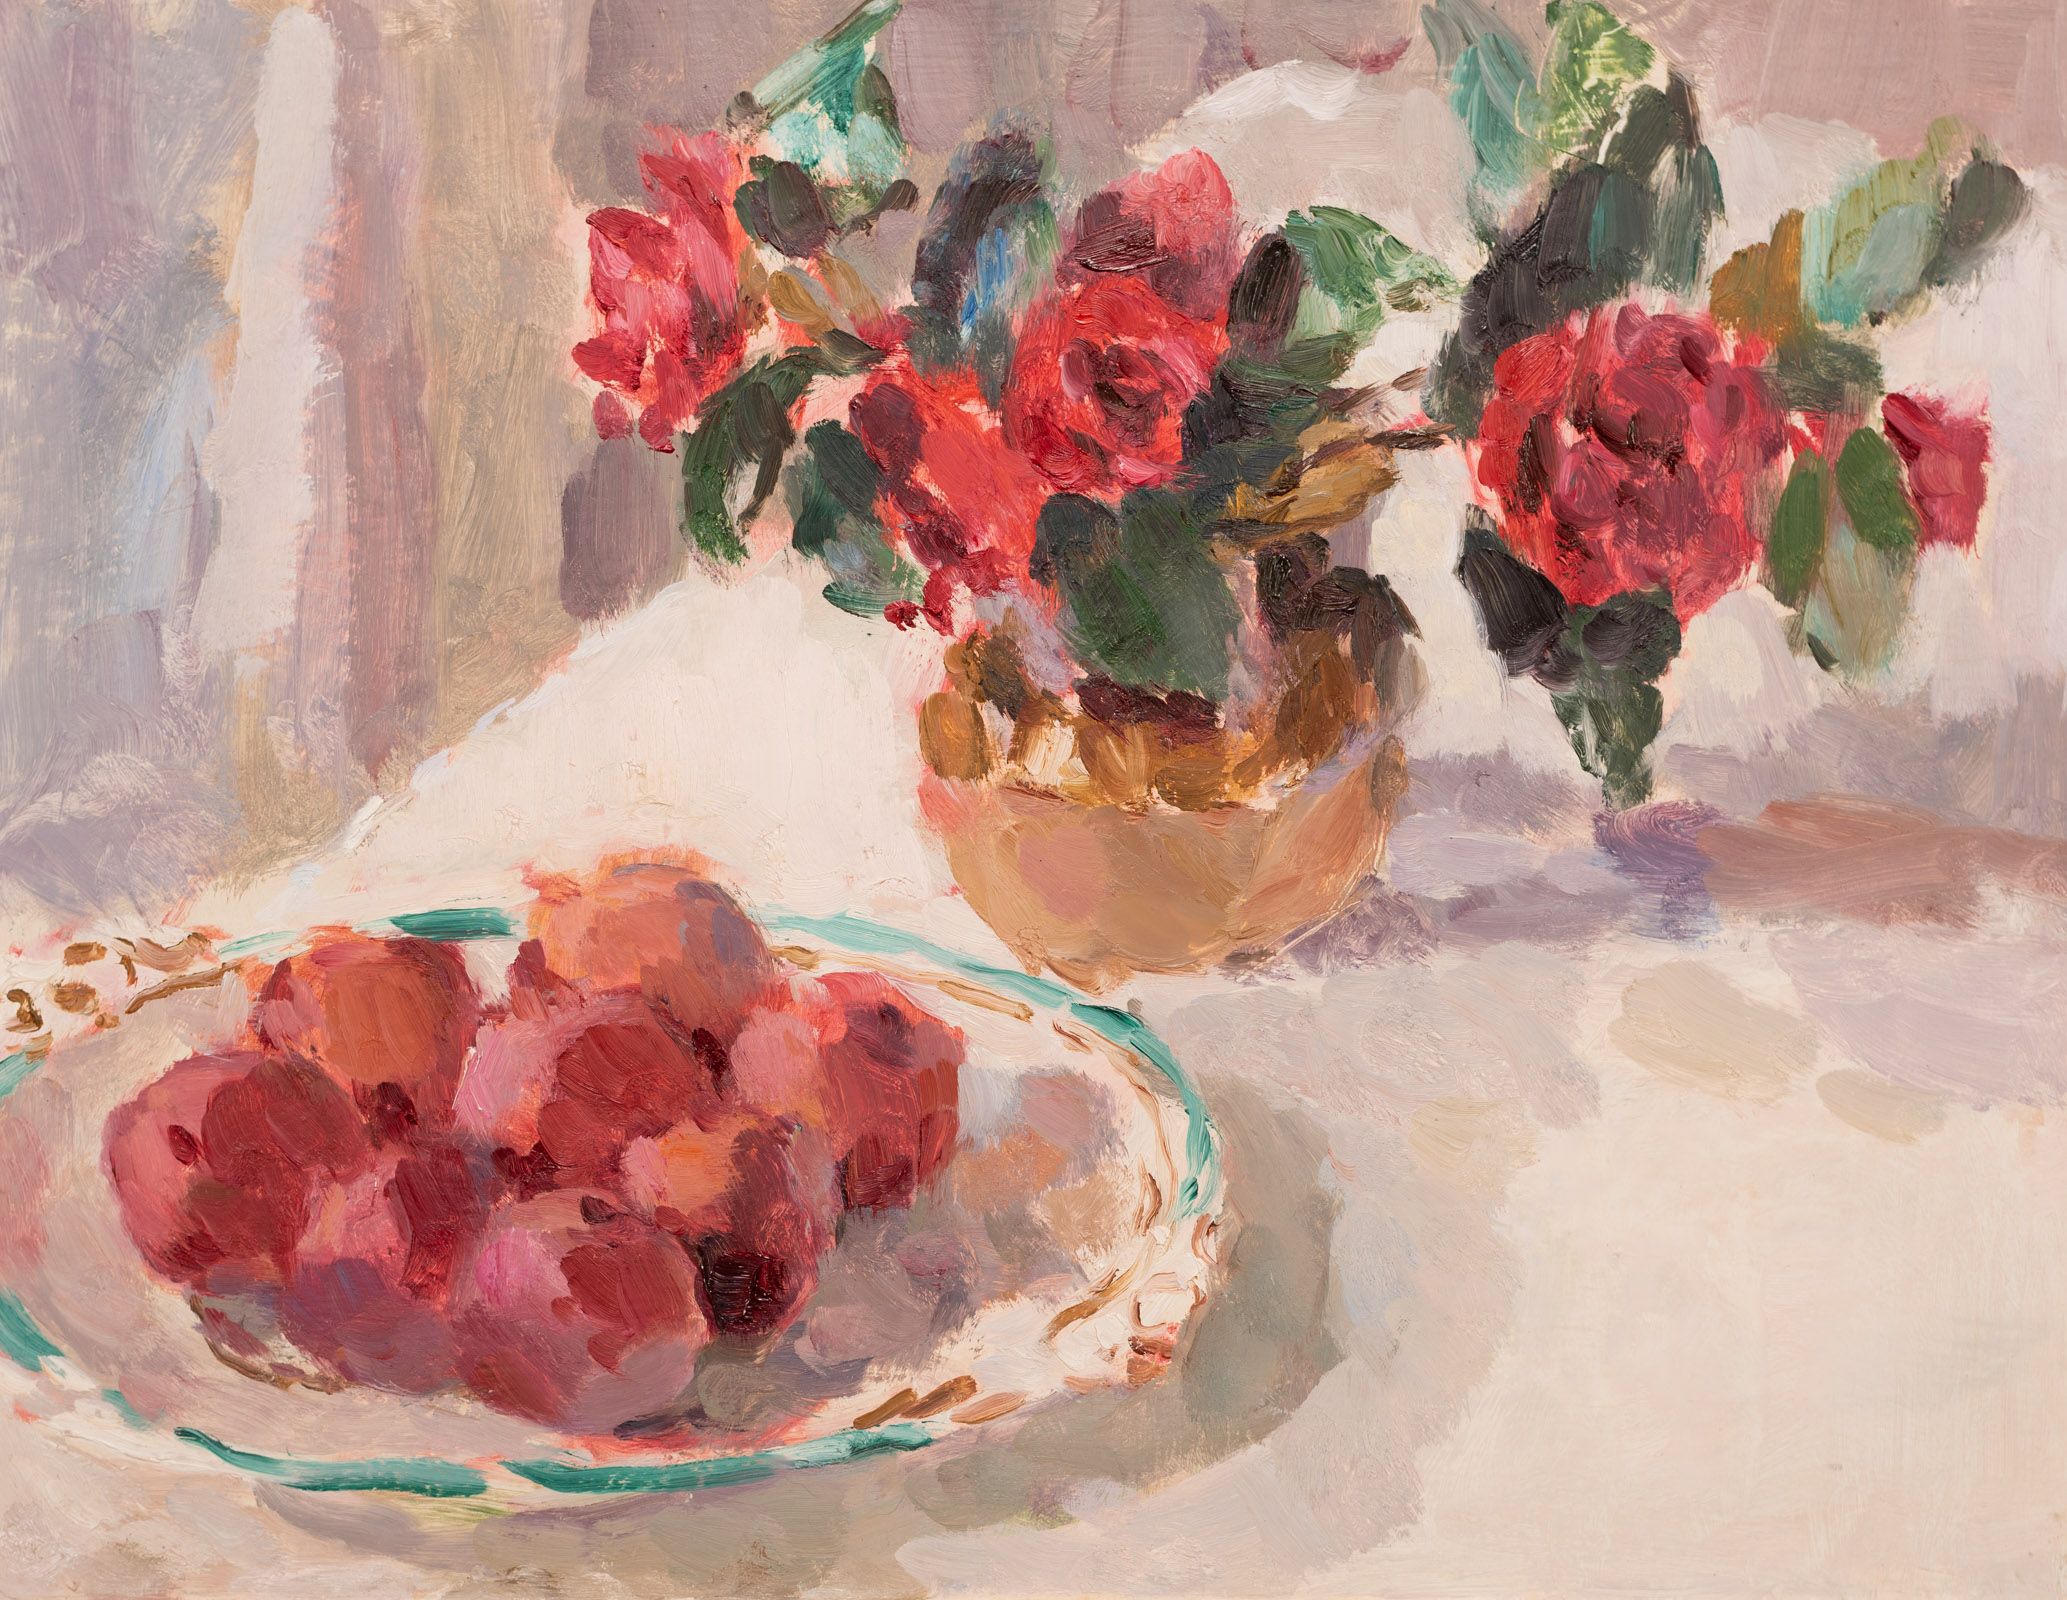 Camellias and a Dish of Plums by Lynne Cartlidge